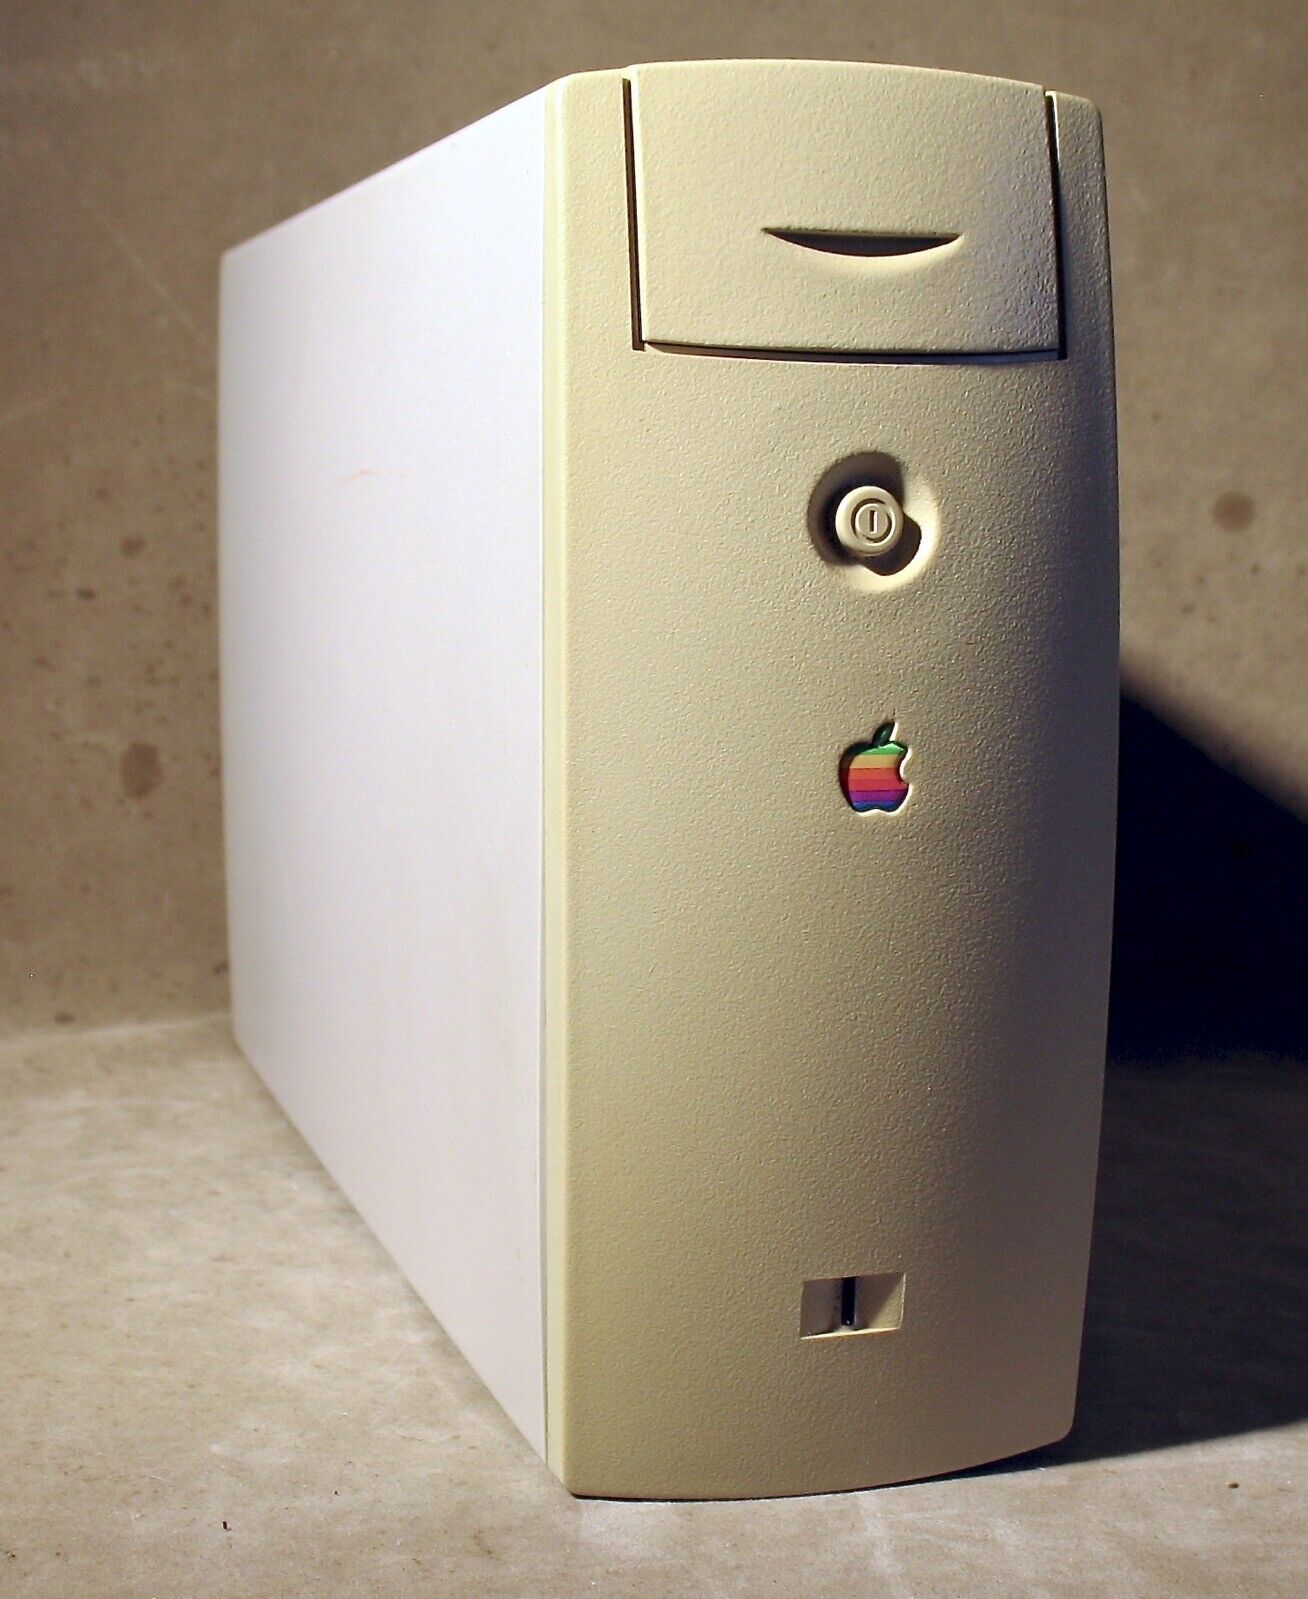 Apple External Hard Drive - 2GB SCSI - M2115 - TESTED/WORKING